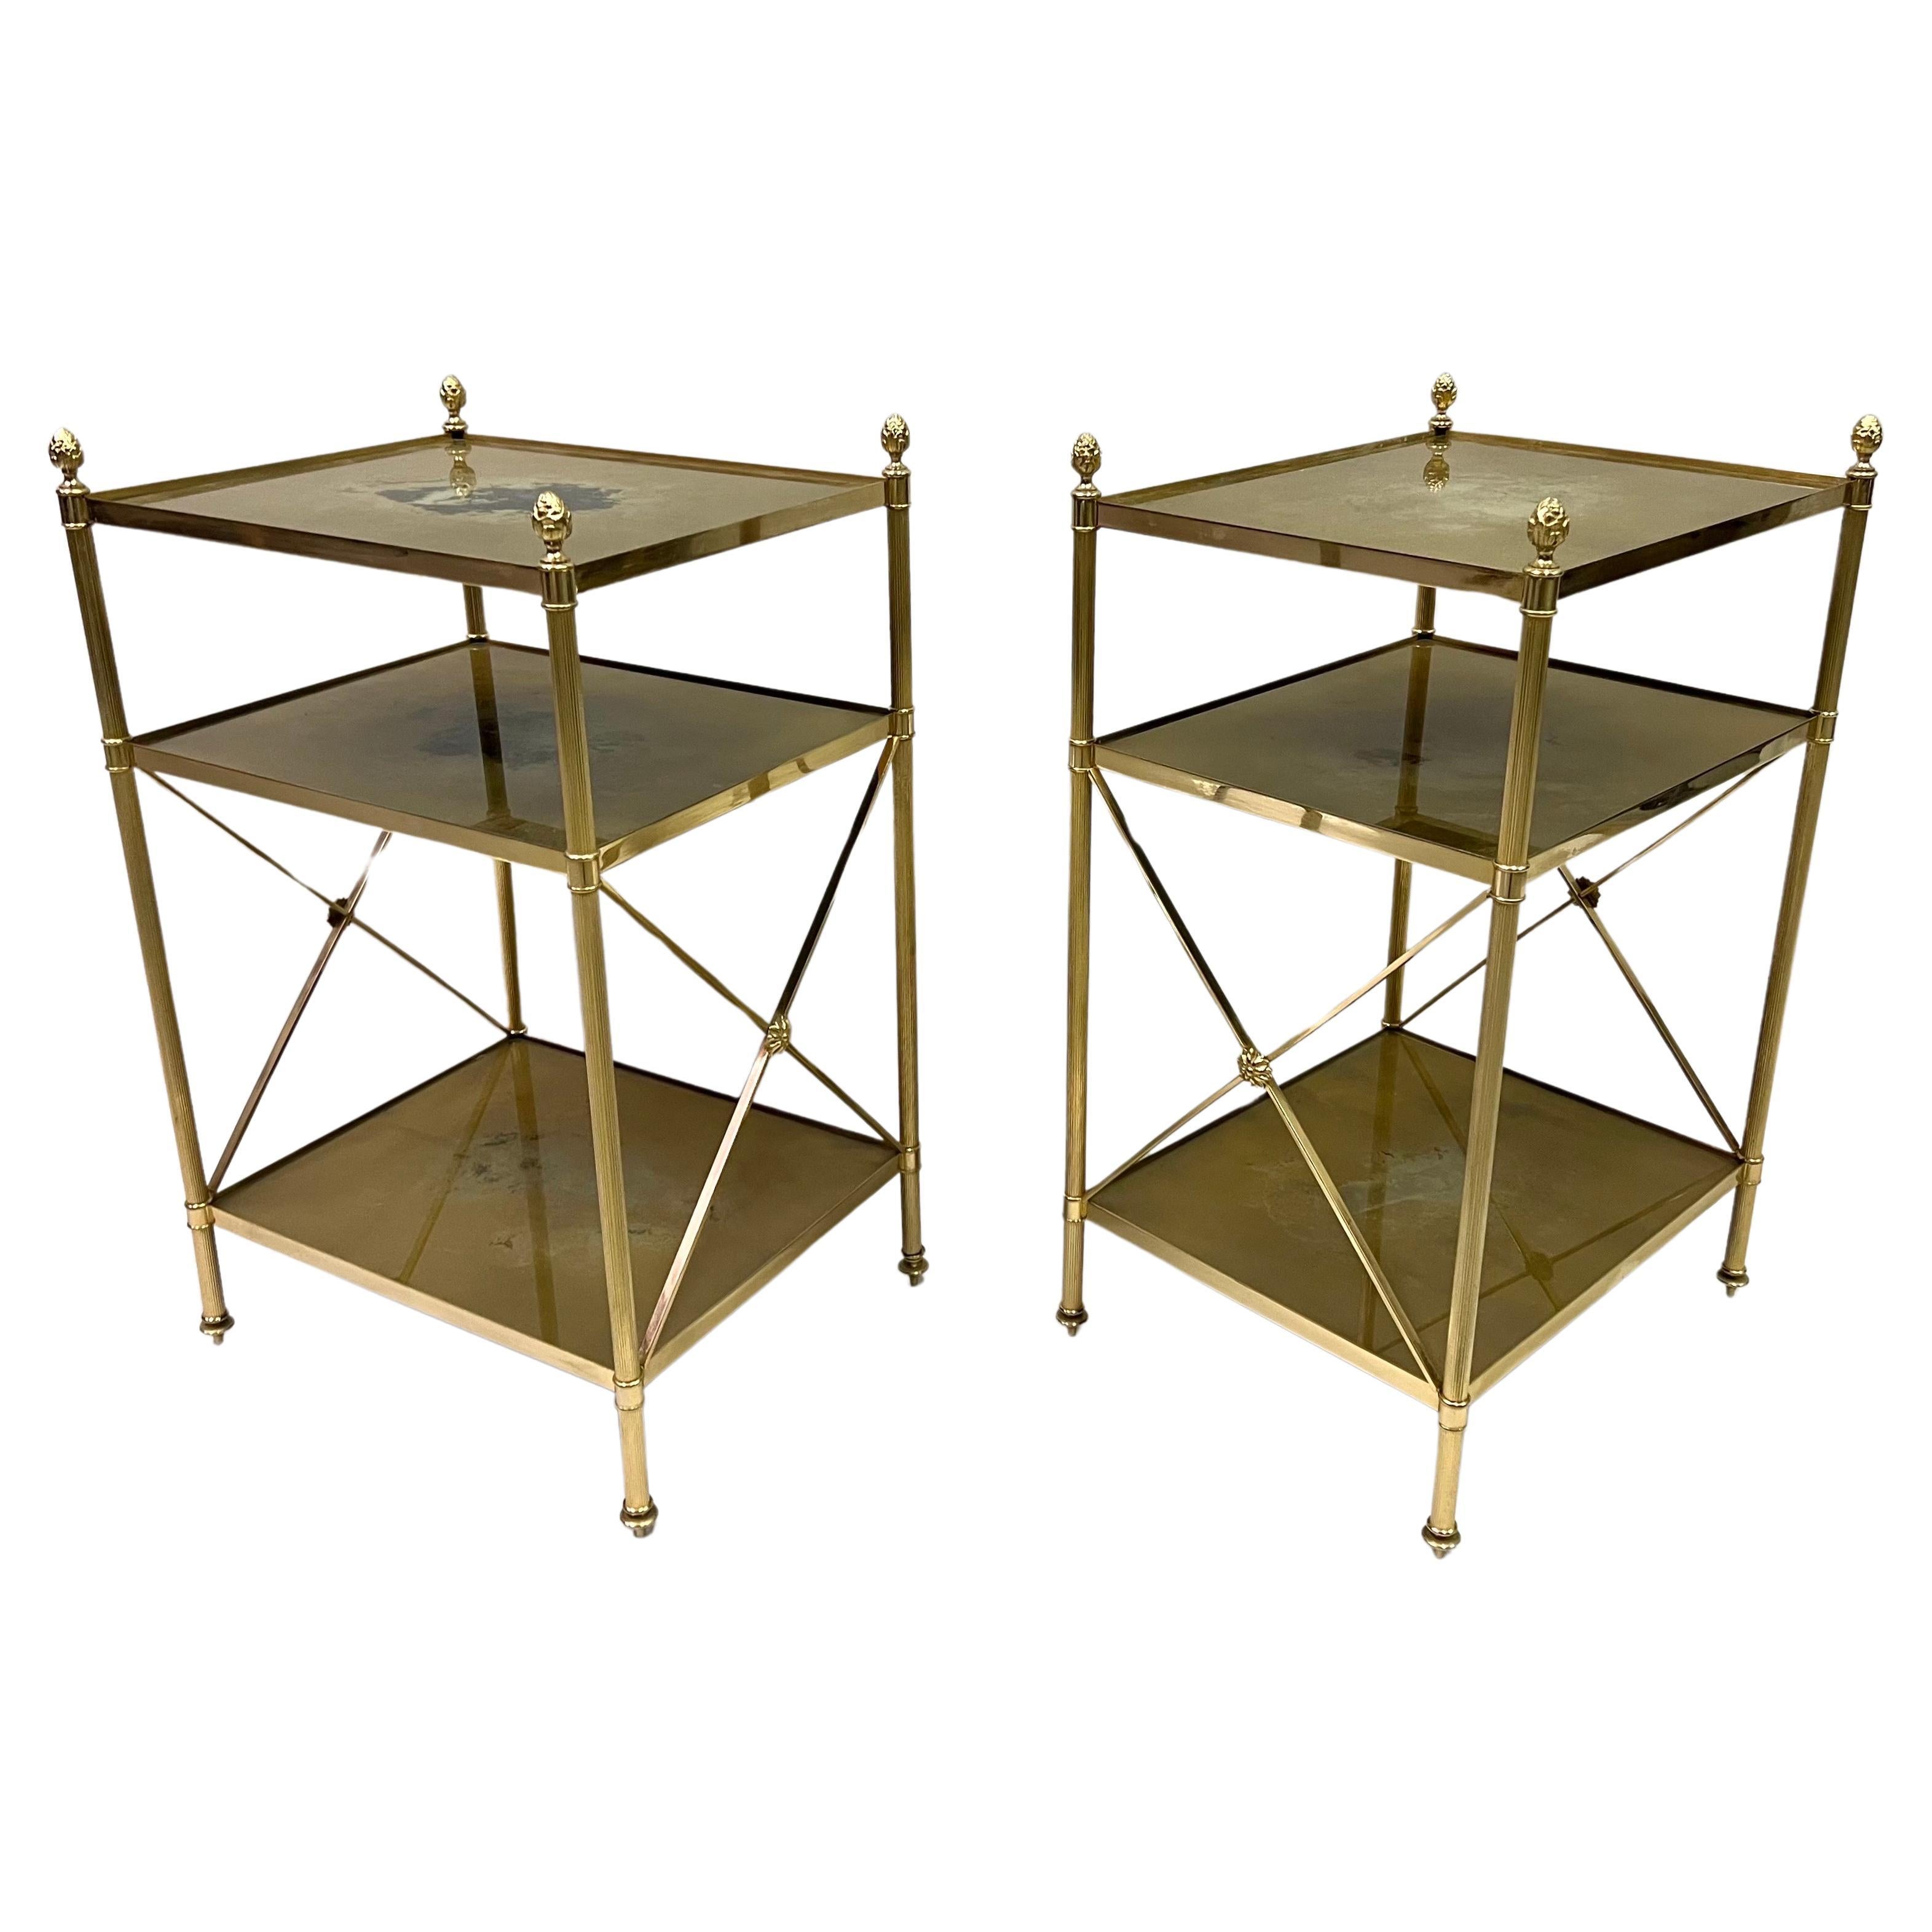 Pair of French Modern Neoclassical Brass & Verre Eglomisse 3 Tier Side Tables For Sale